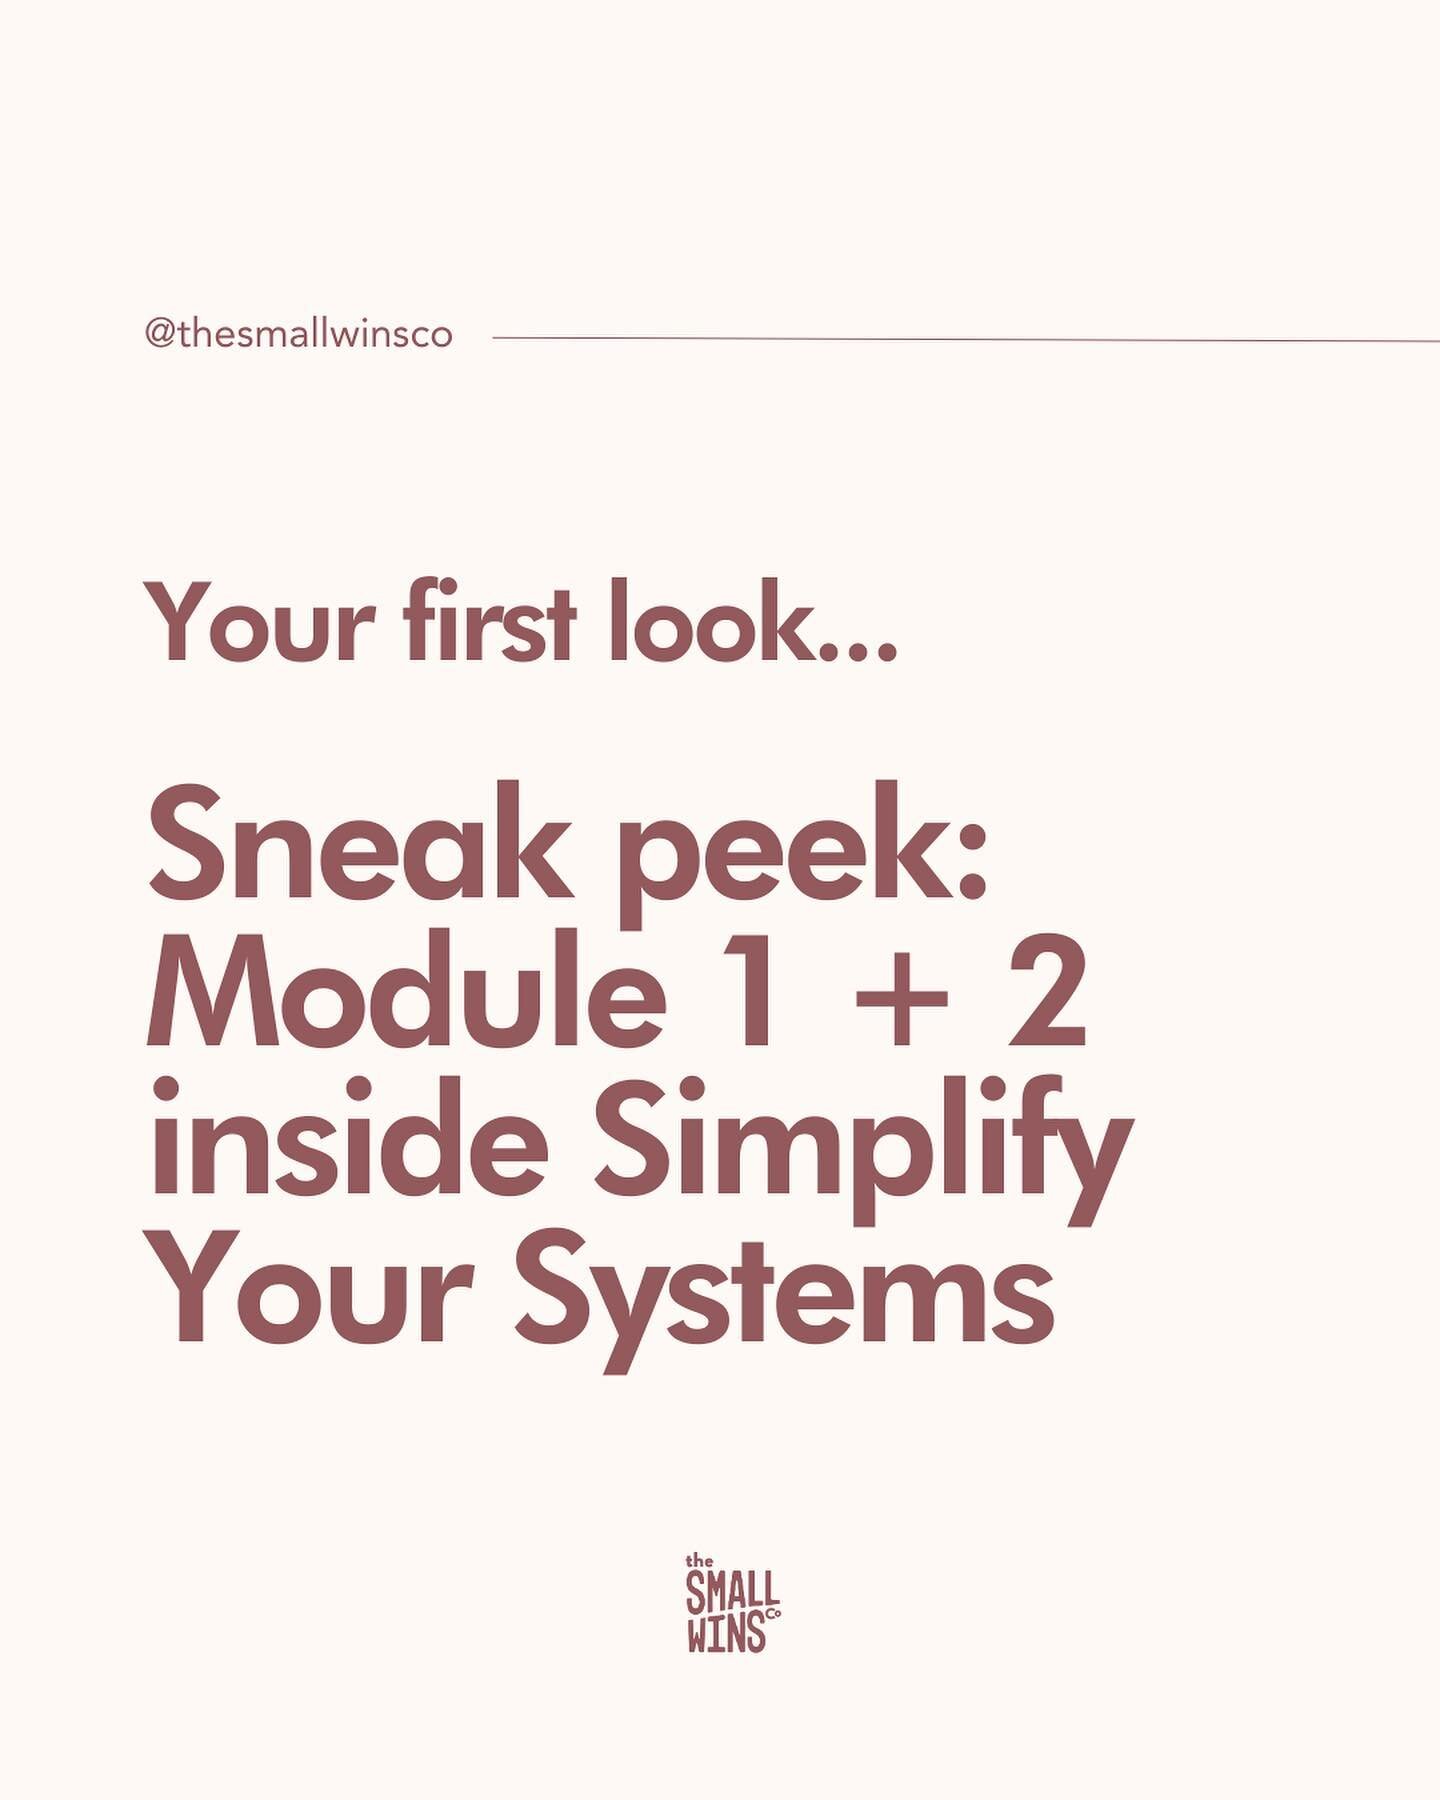 When I say I&rsquo;m fully supporting you to build better systems, I effing mean it. 

Swipe left ⬅️ to see a fraction of the support and step-by-step guidance you&rsquo;ll be getting inside Simplify Your Systems.

The other added benefit to enroll t